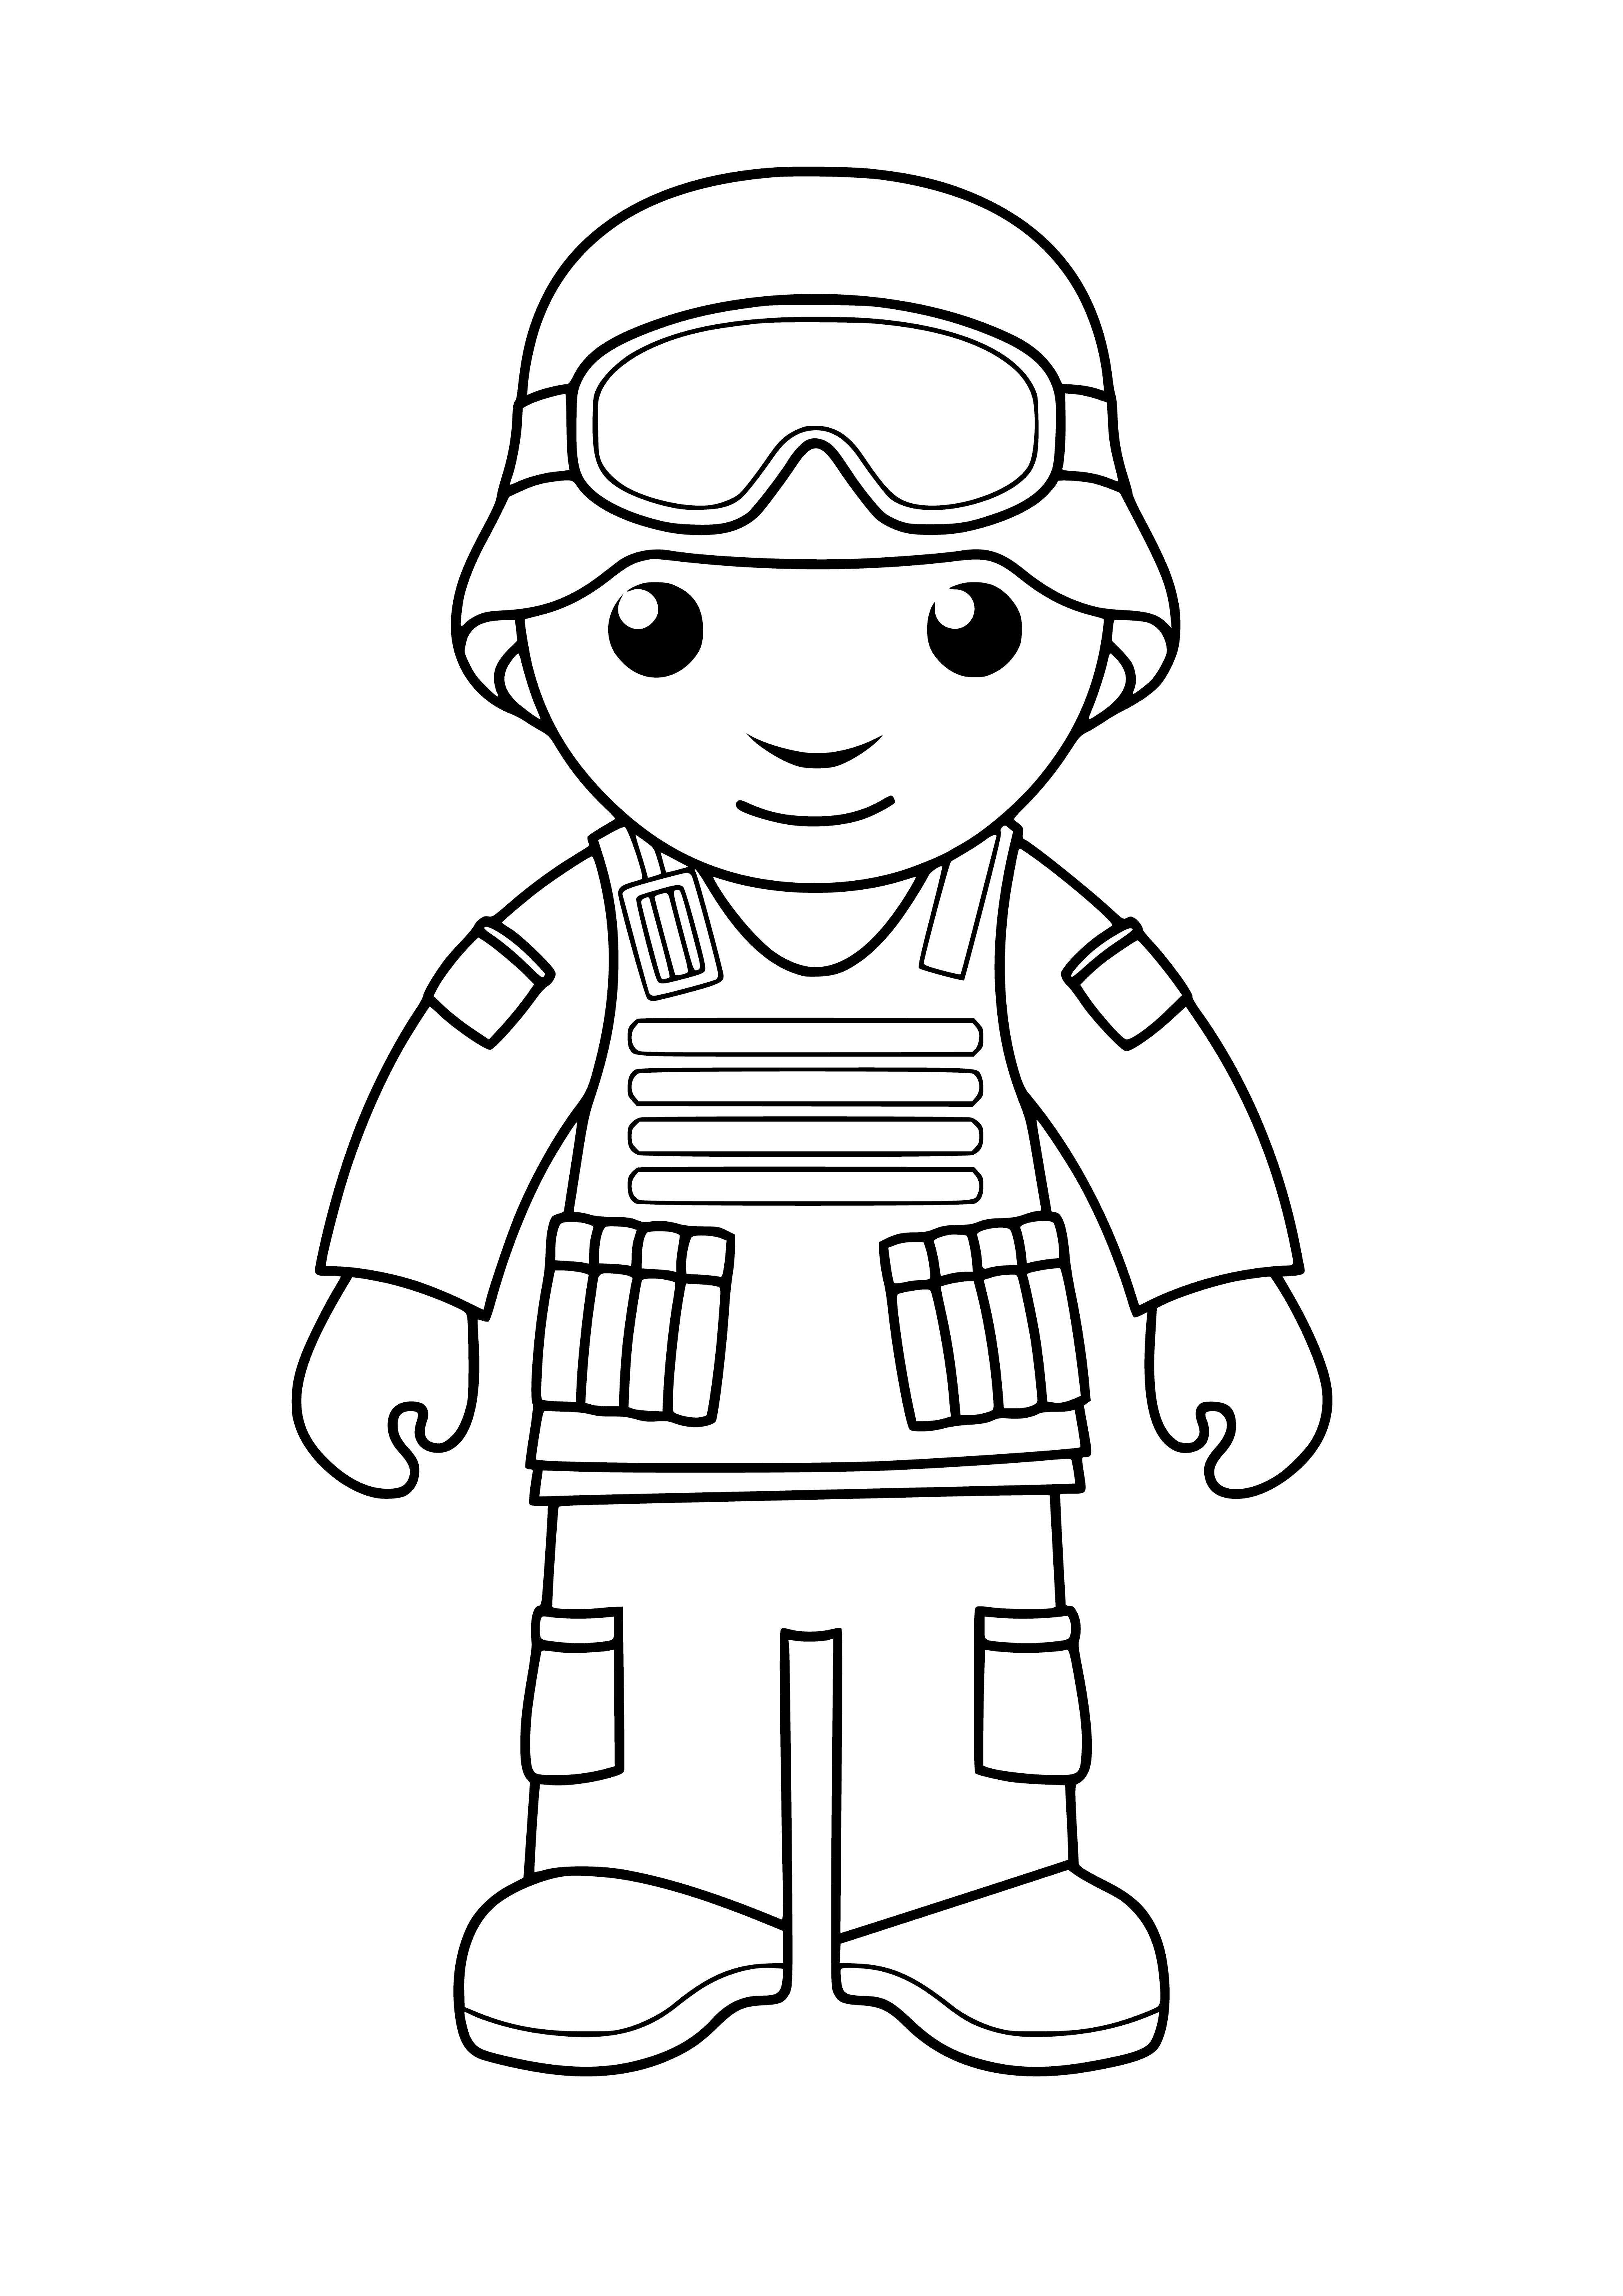 coloring page: Man in military uniform stands at attention, gun strapped to back & helmet on head, ready to fight.